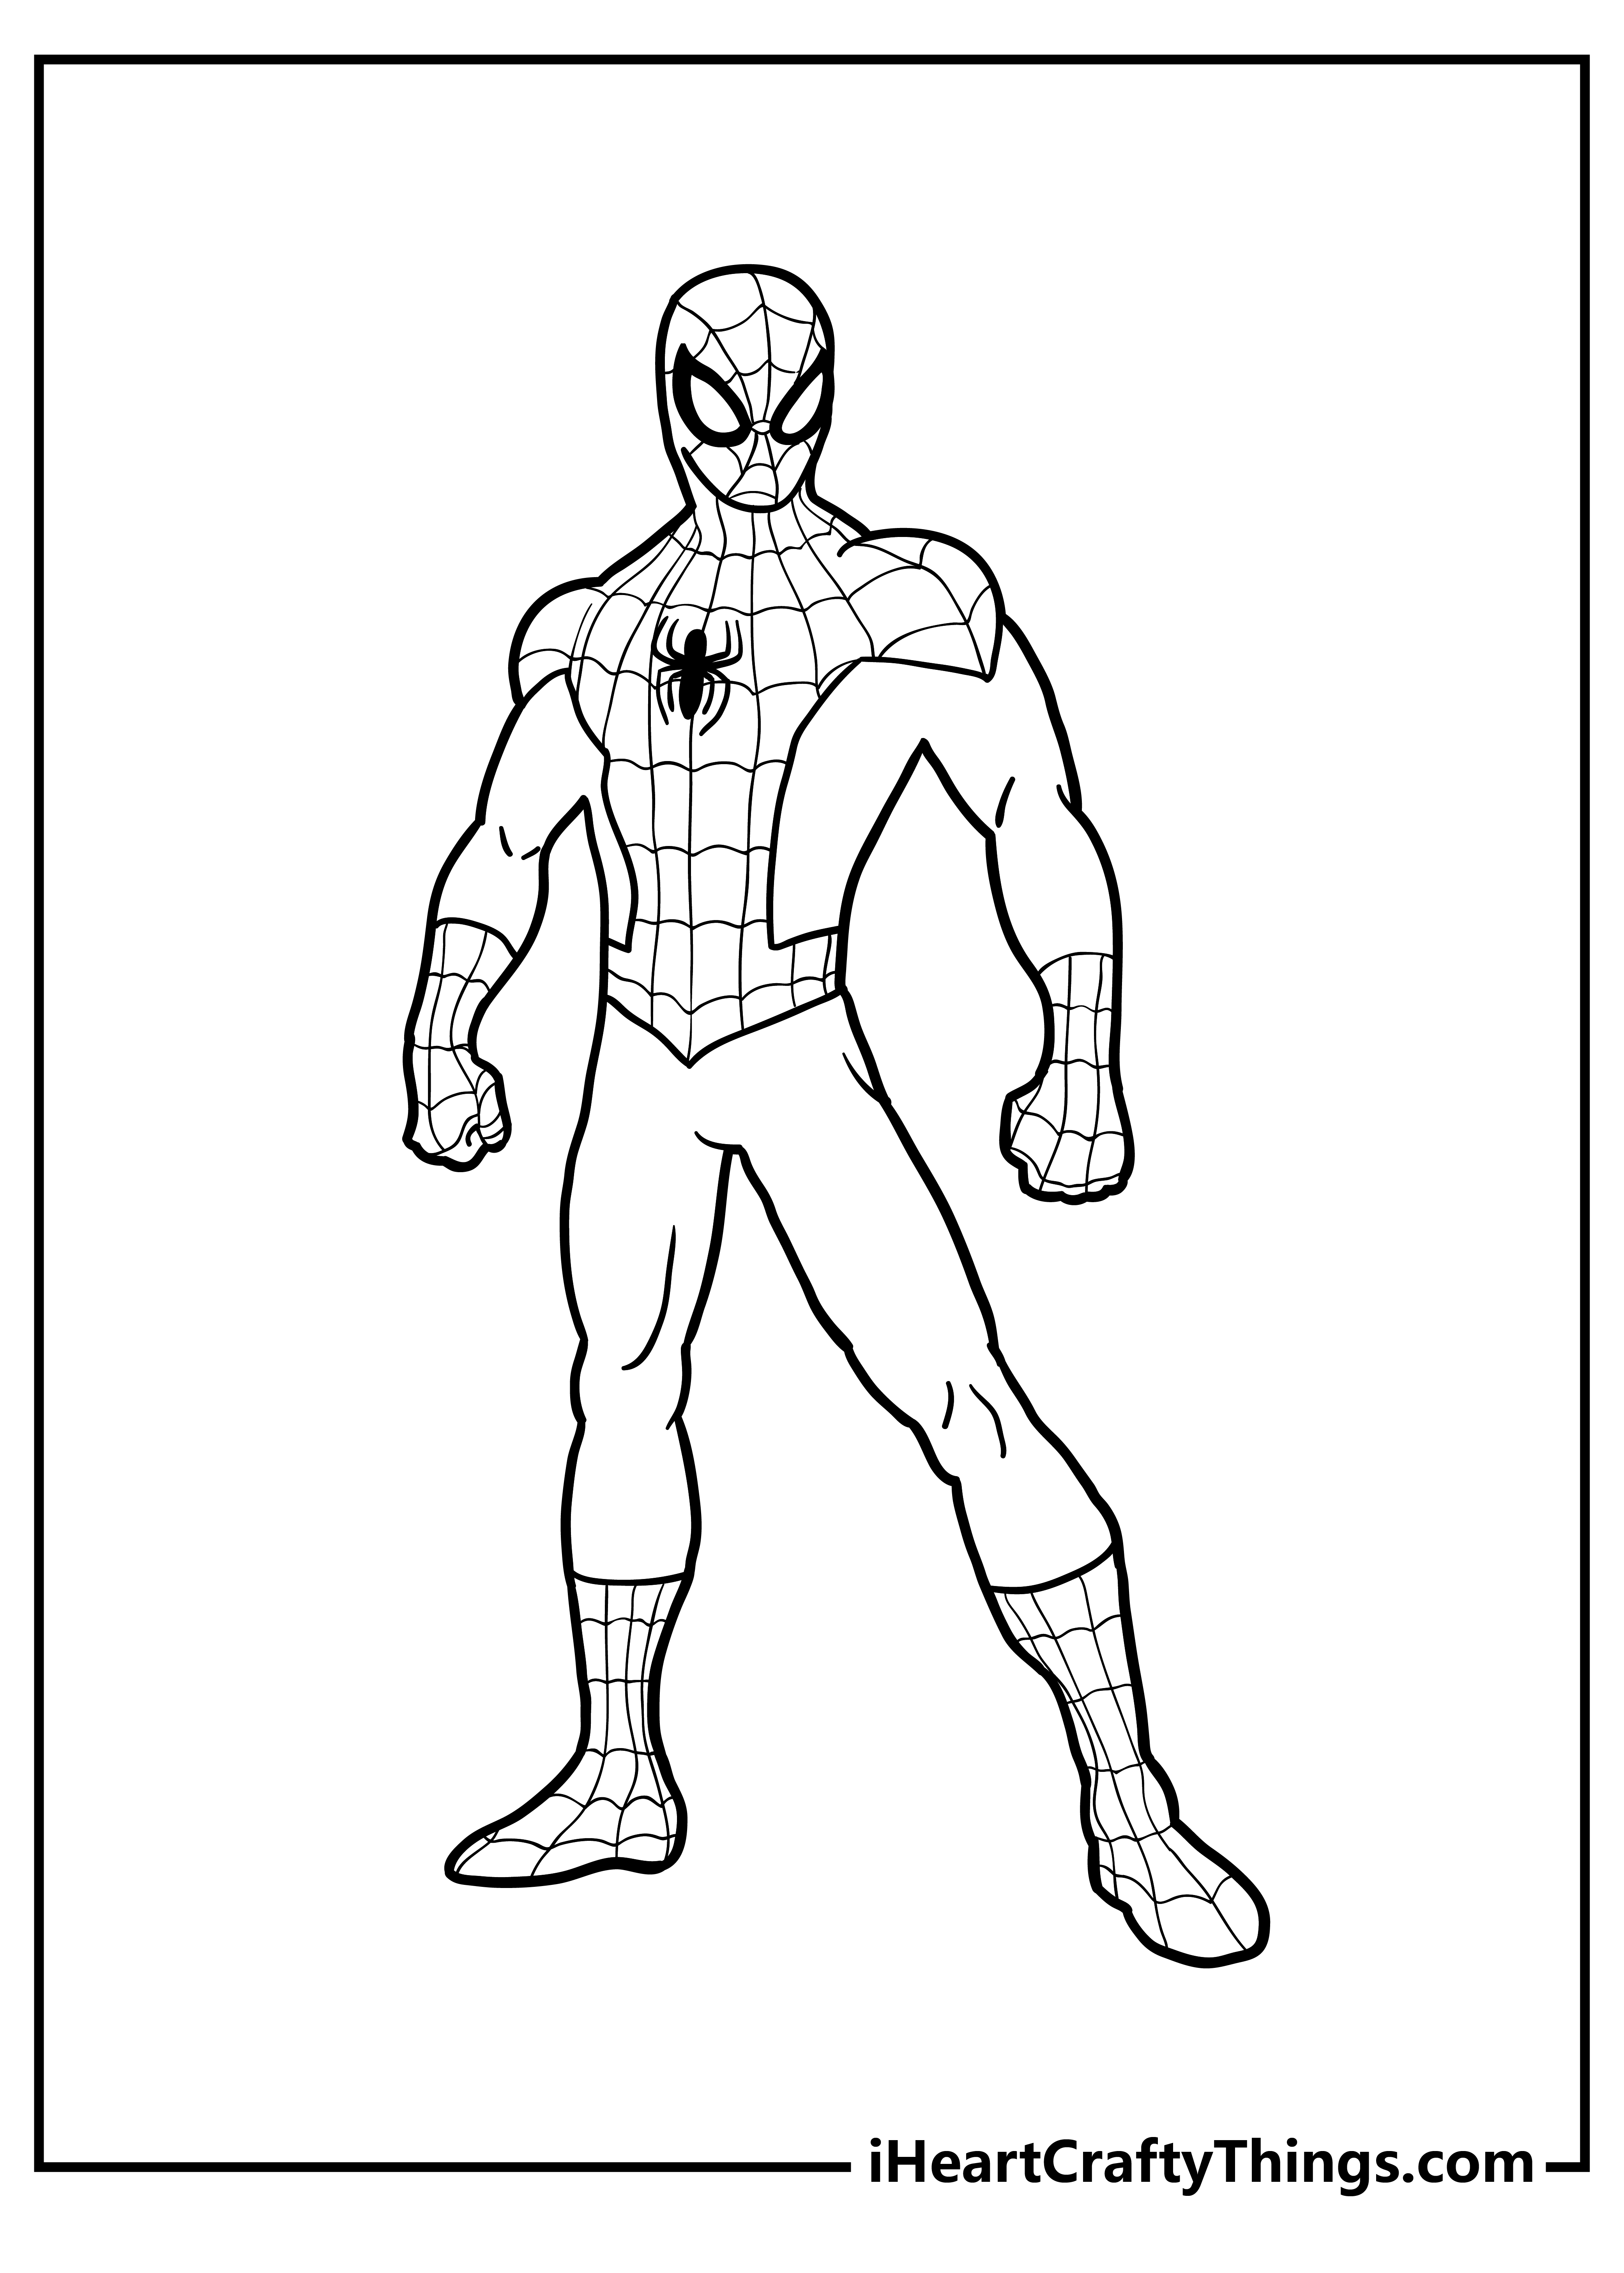 Avengers Coloring Pages for preschoolers free printable